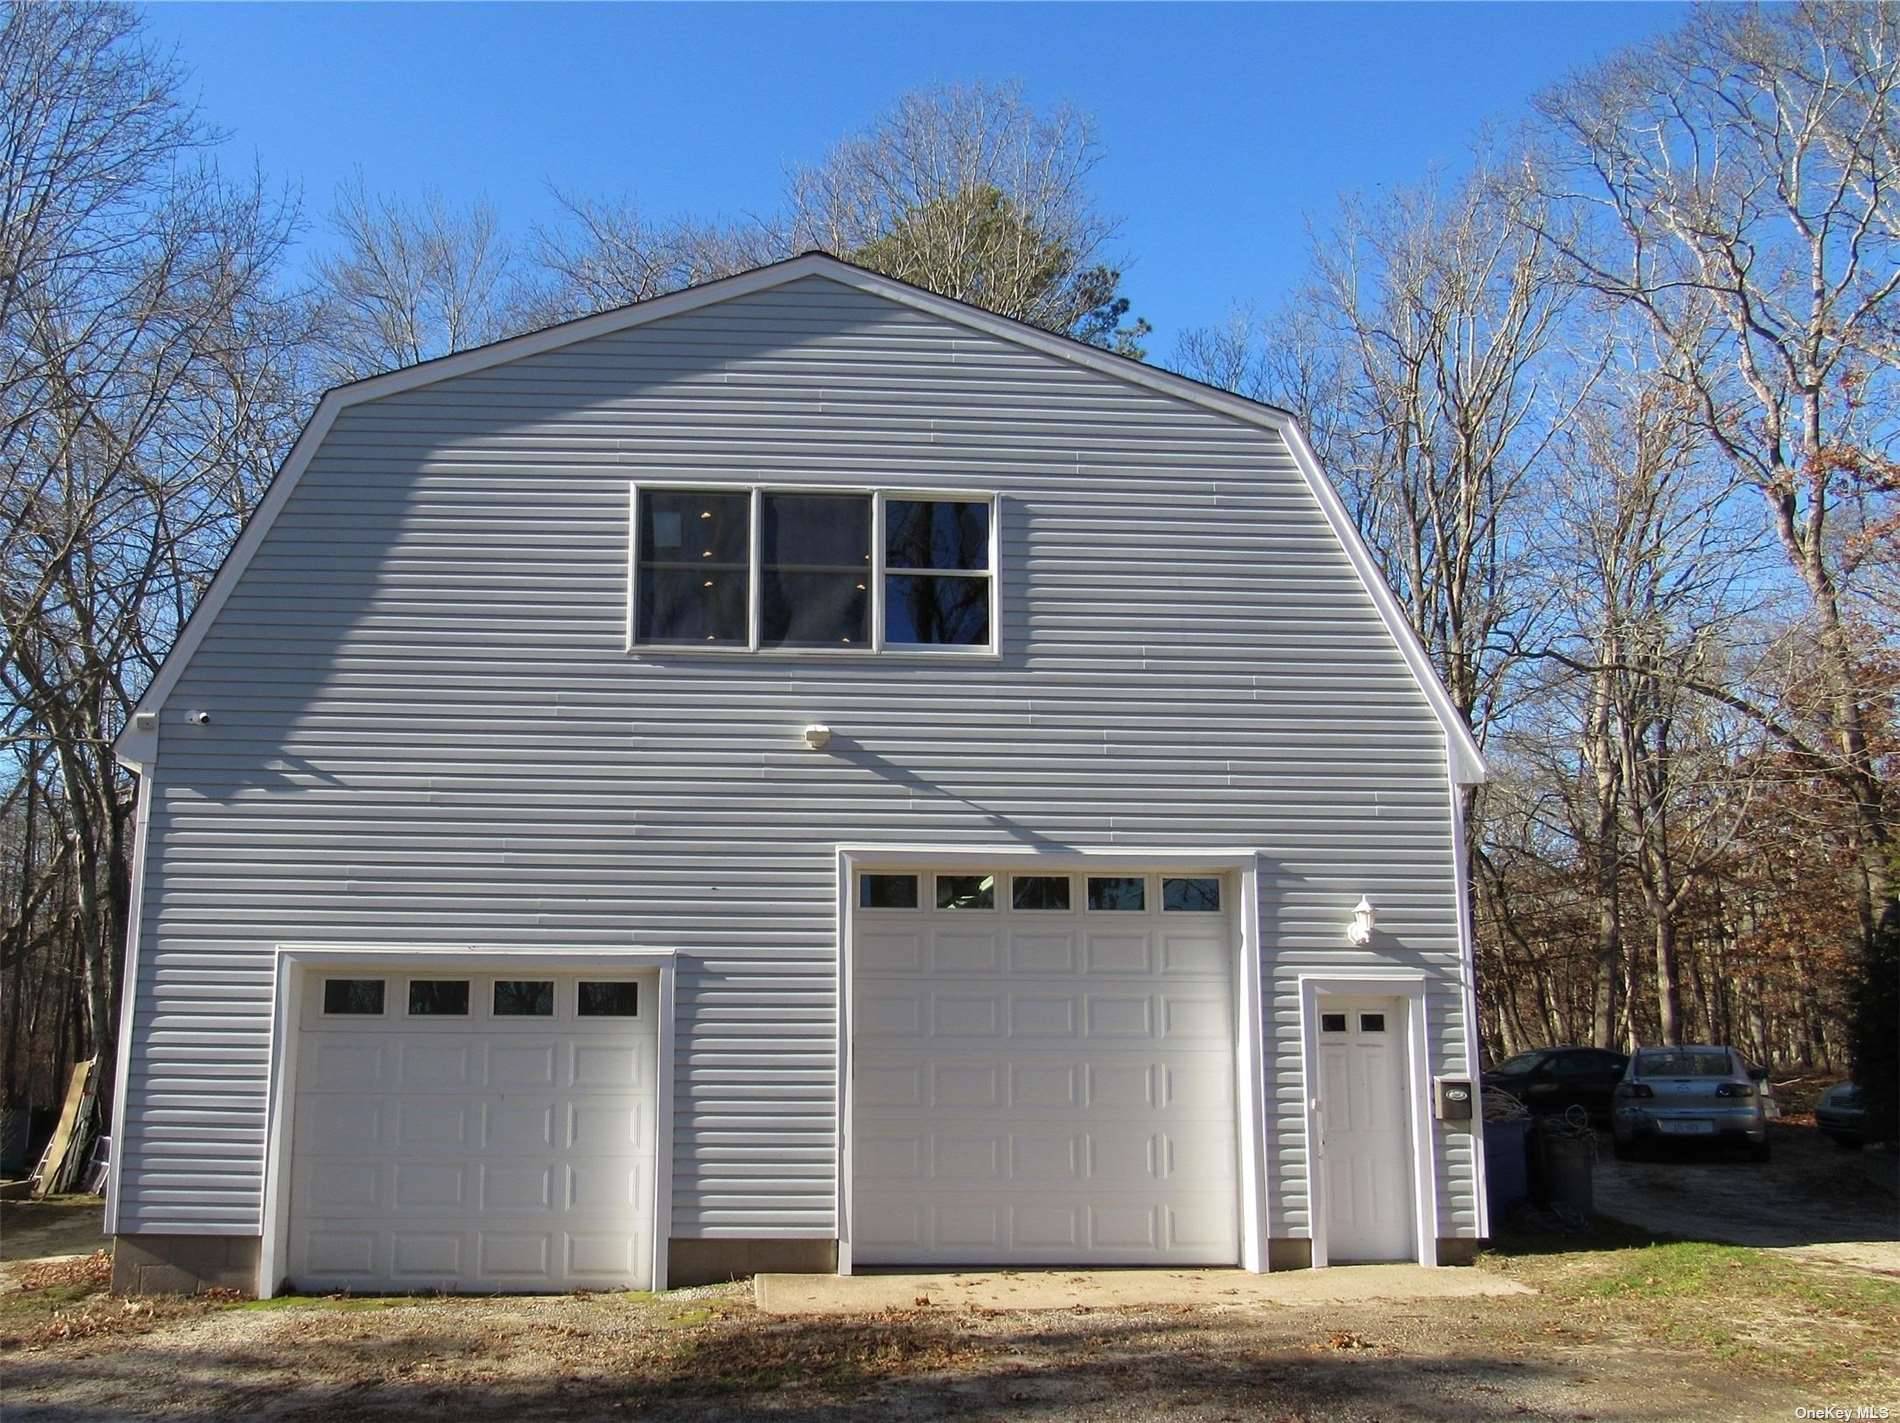 Oversized 33X40 2 car garage with heated and air conditioned second floor stroage area.